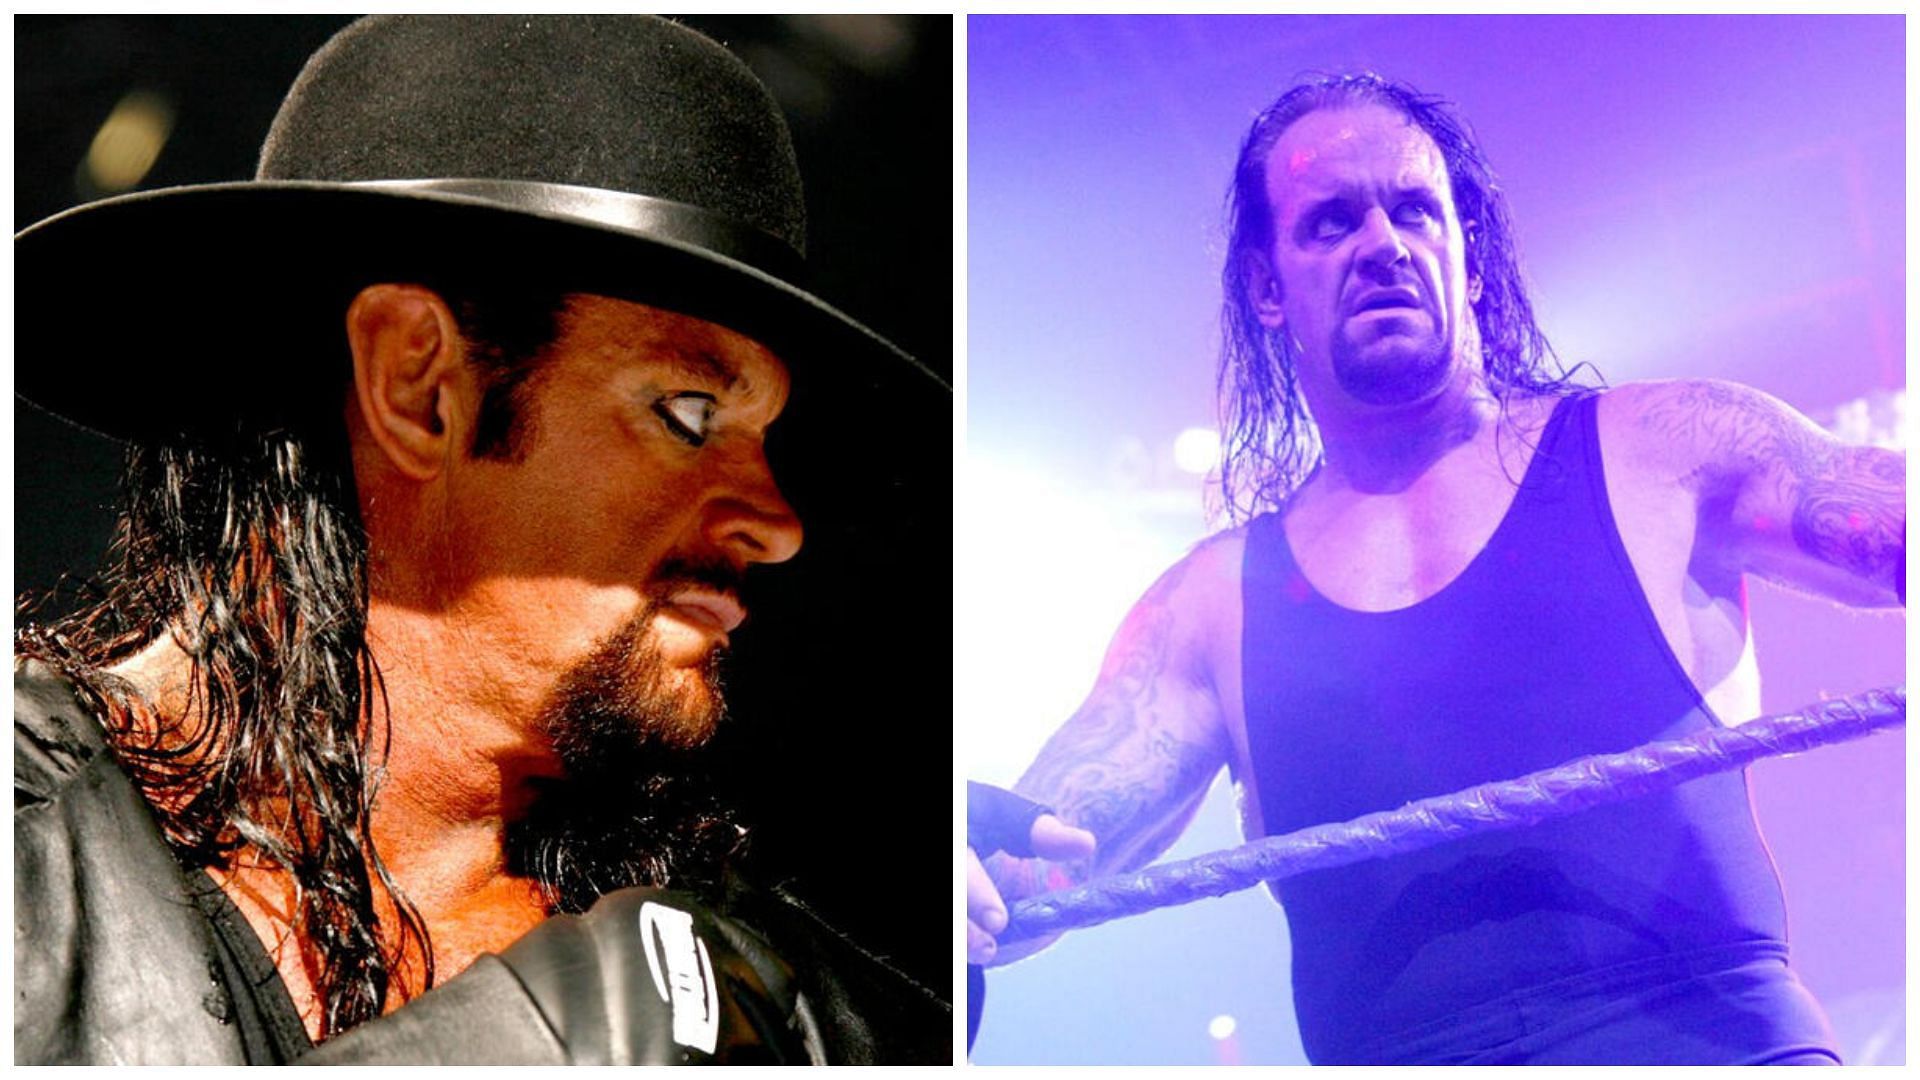 The Undertaker is a former WWE World Champion.